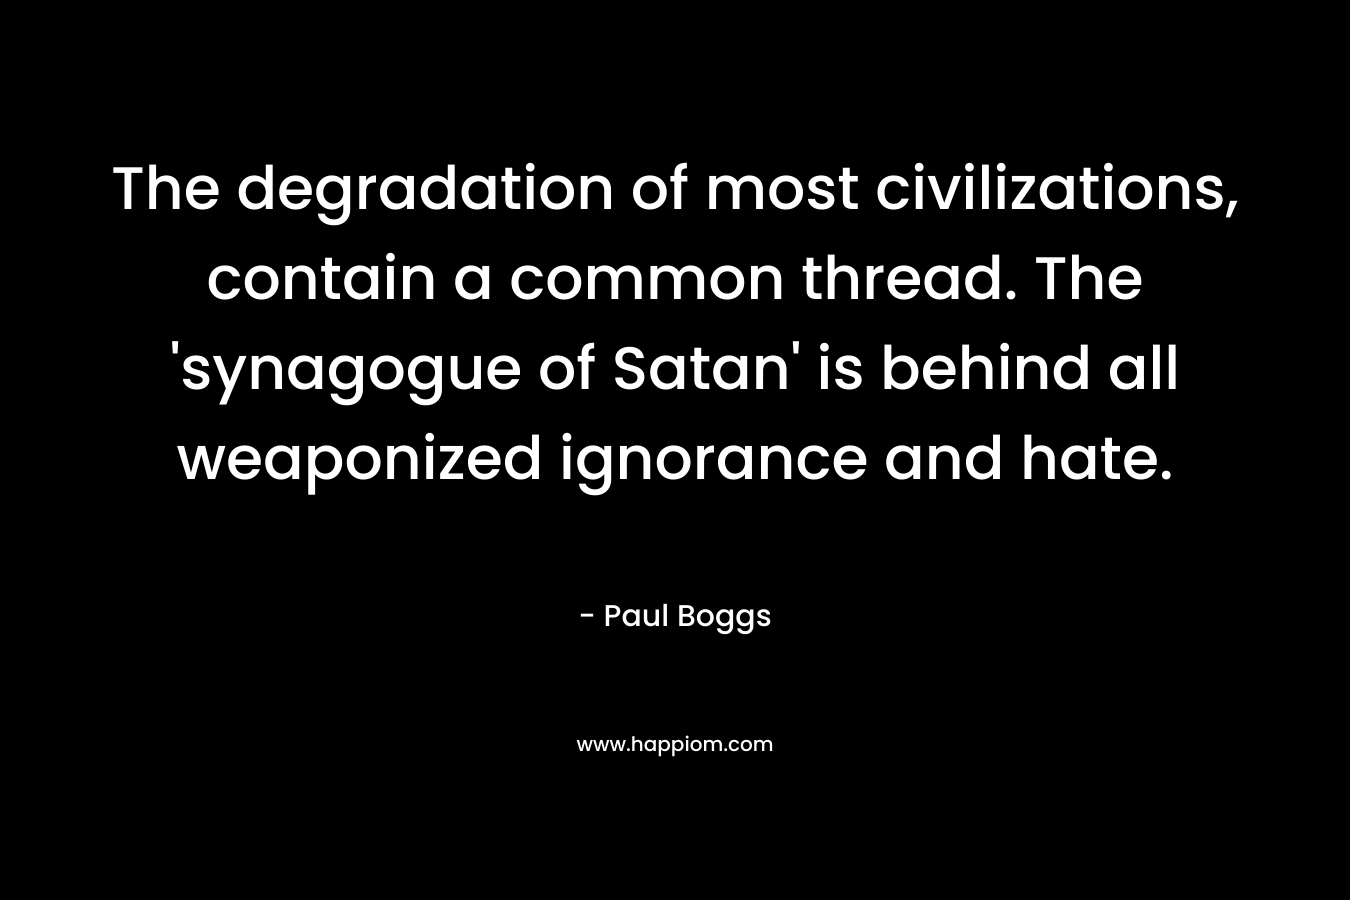 The degradation of most civilizations, contain a common thread. The ‘synagogue of Satan’ is behind all weaponized ignorance and hate. – Paul Boggs